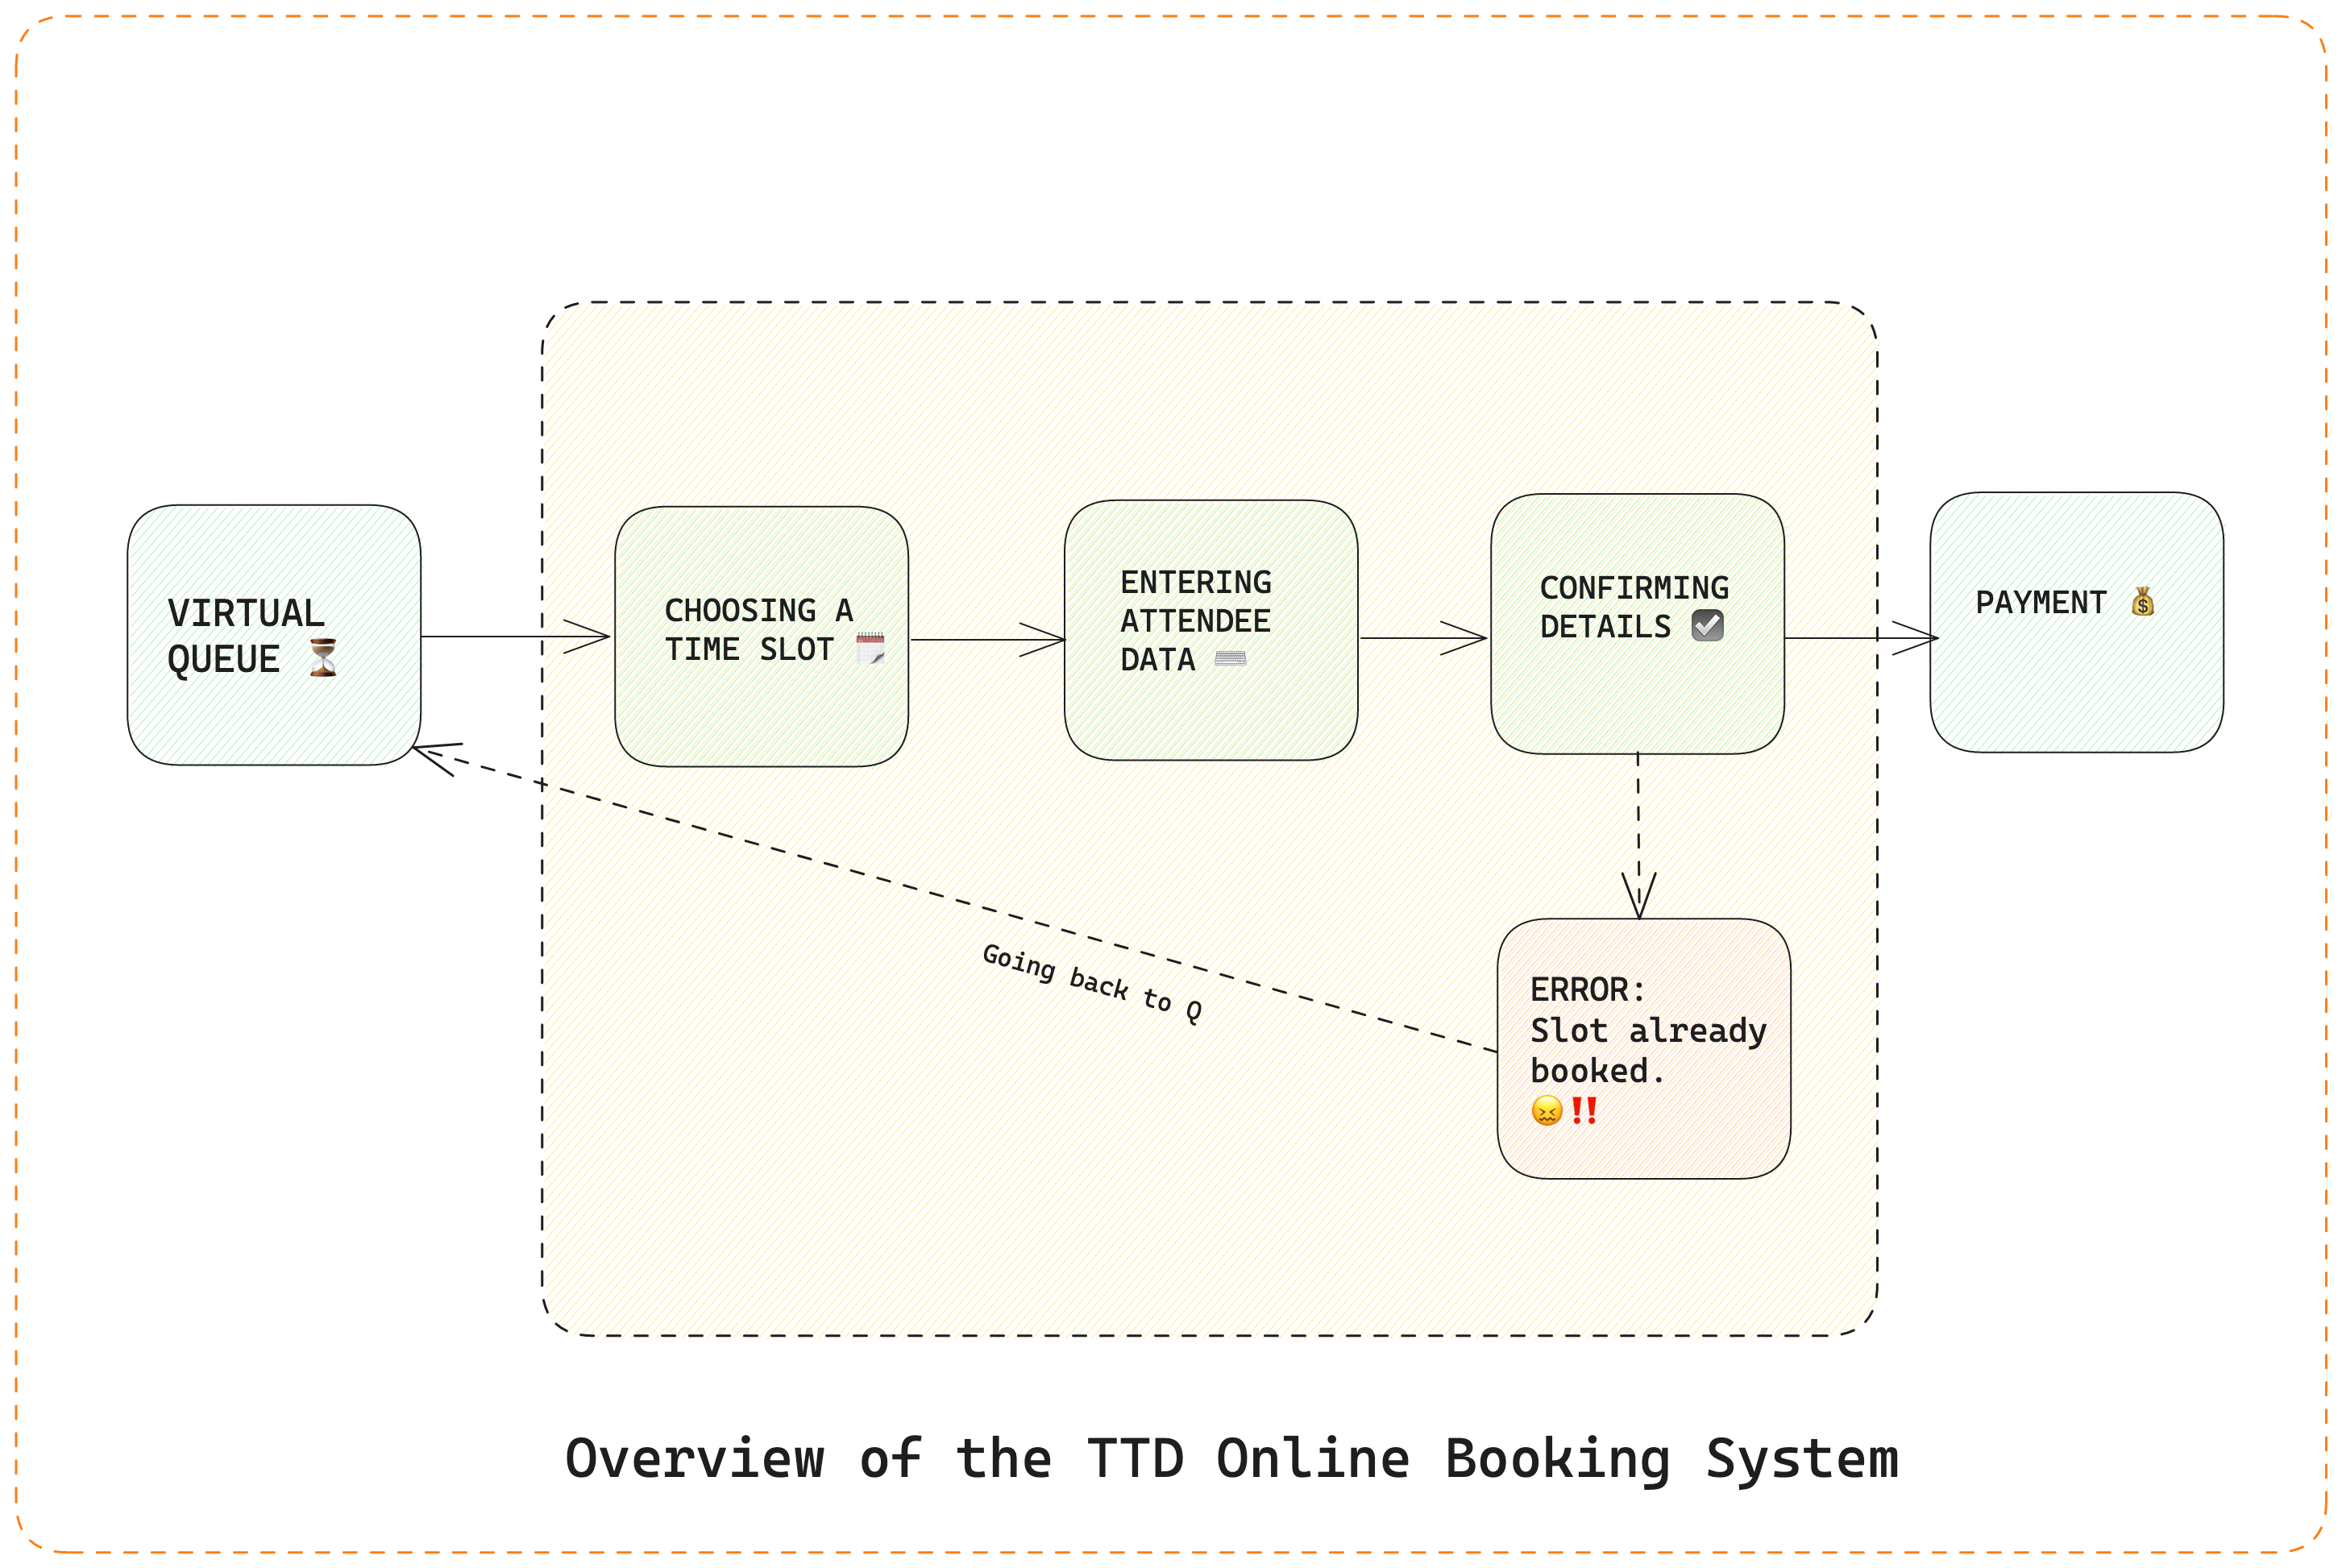 journey of a booking at TTD website